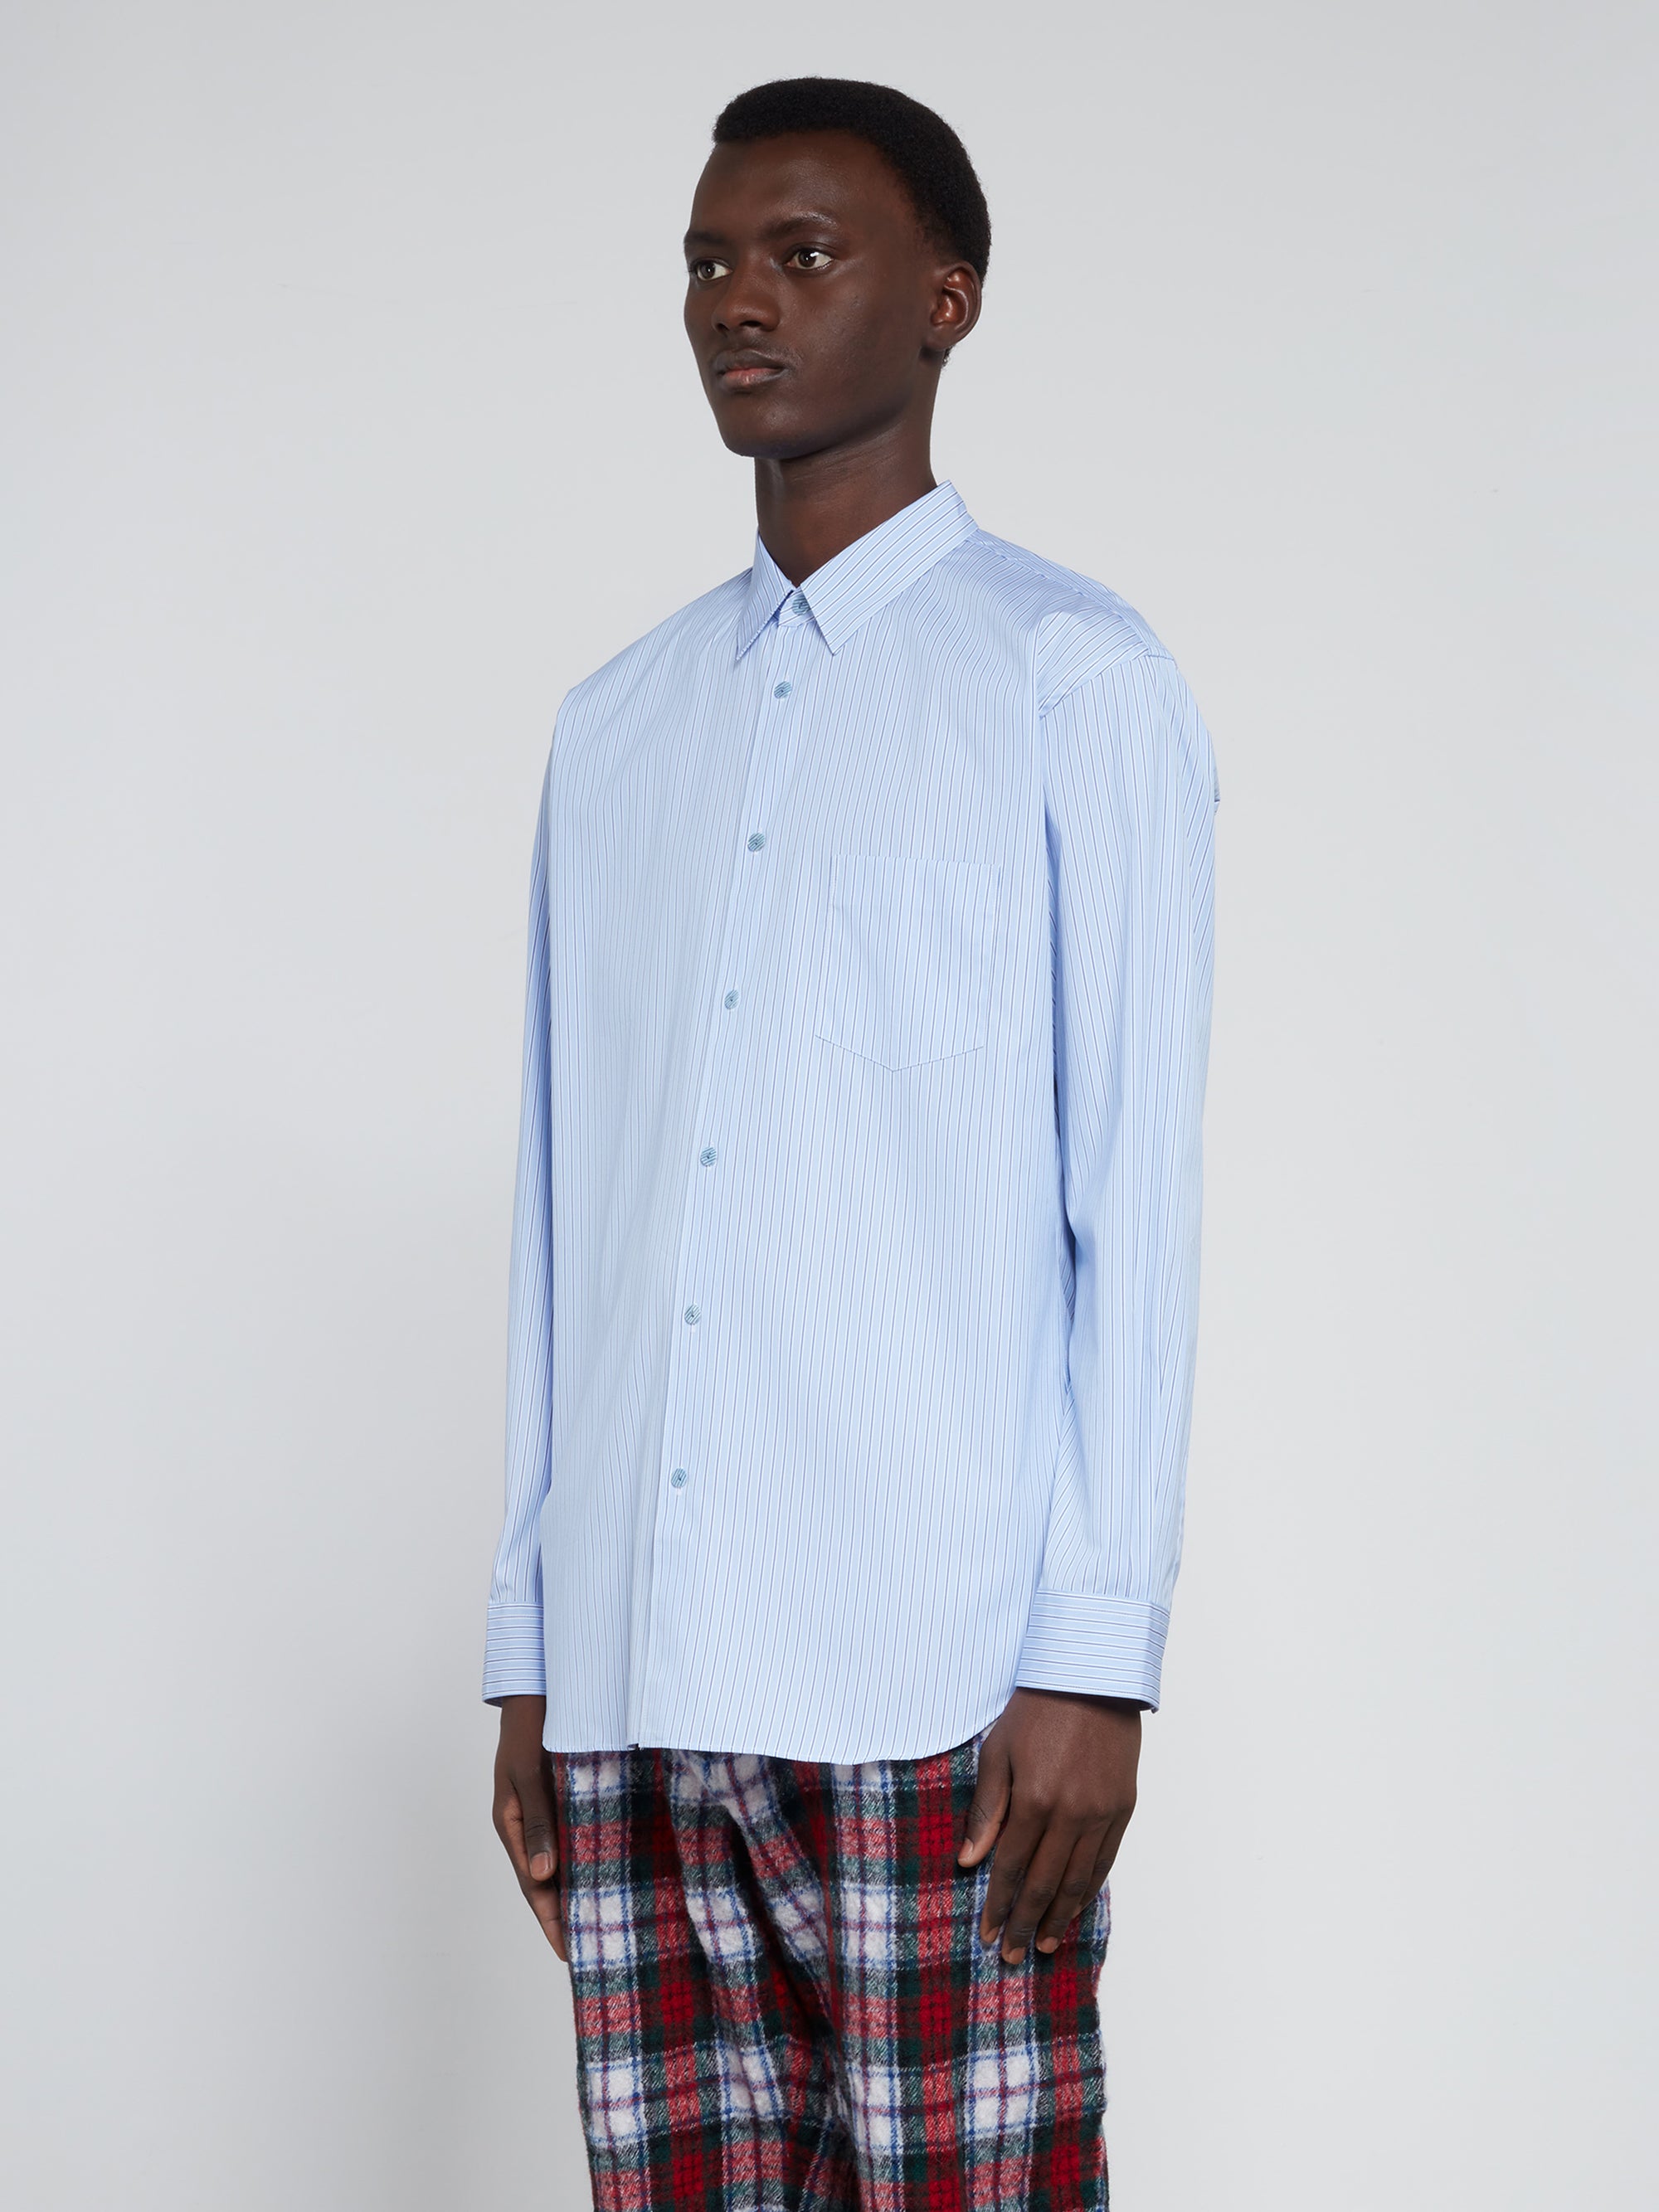 CDG Shirt Forever - Classic Fit Woven Cotton Shirt - (Blue Stripe) view 2